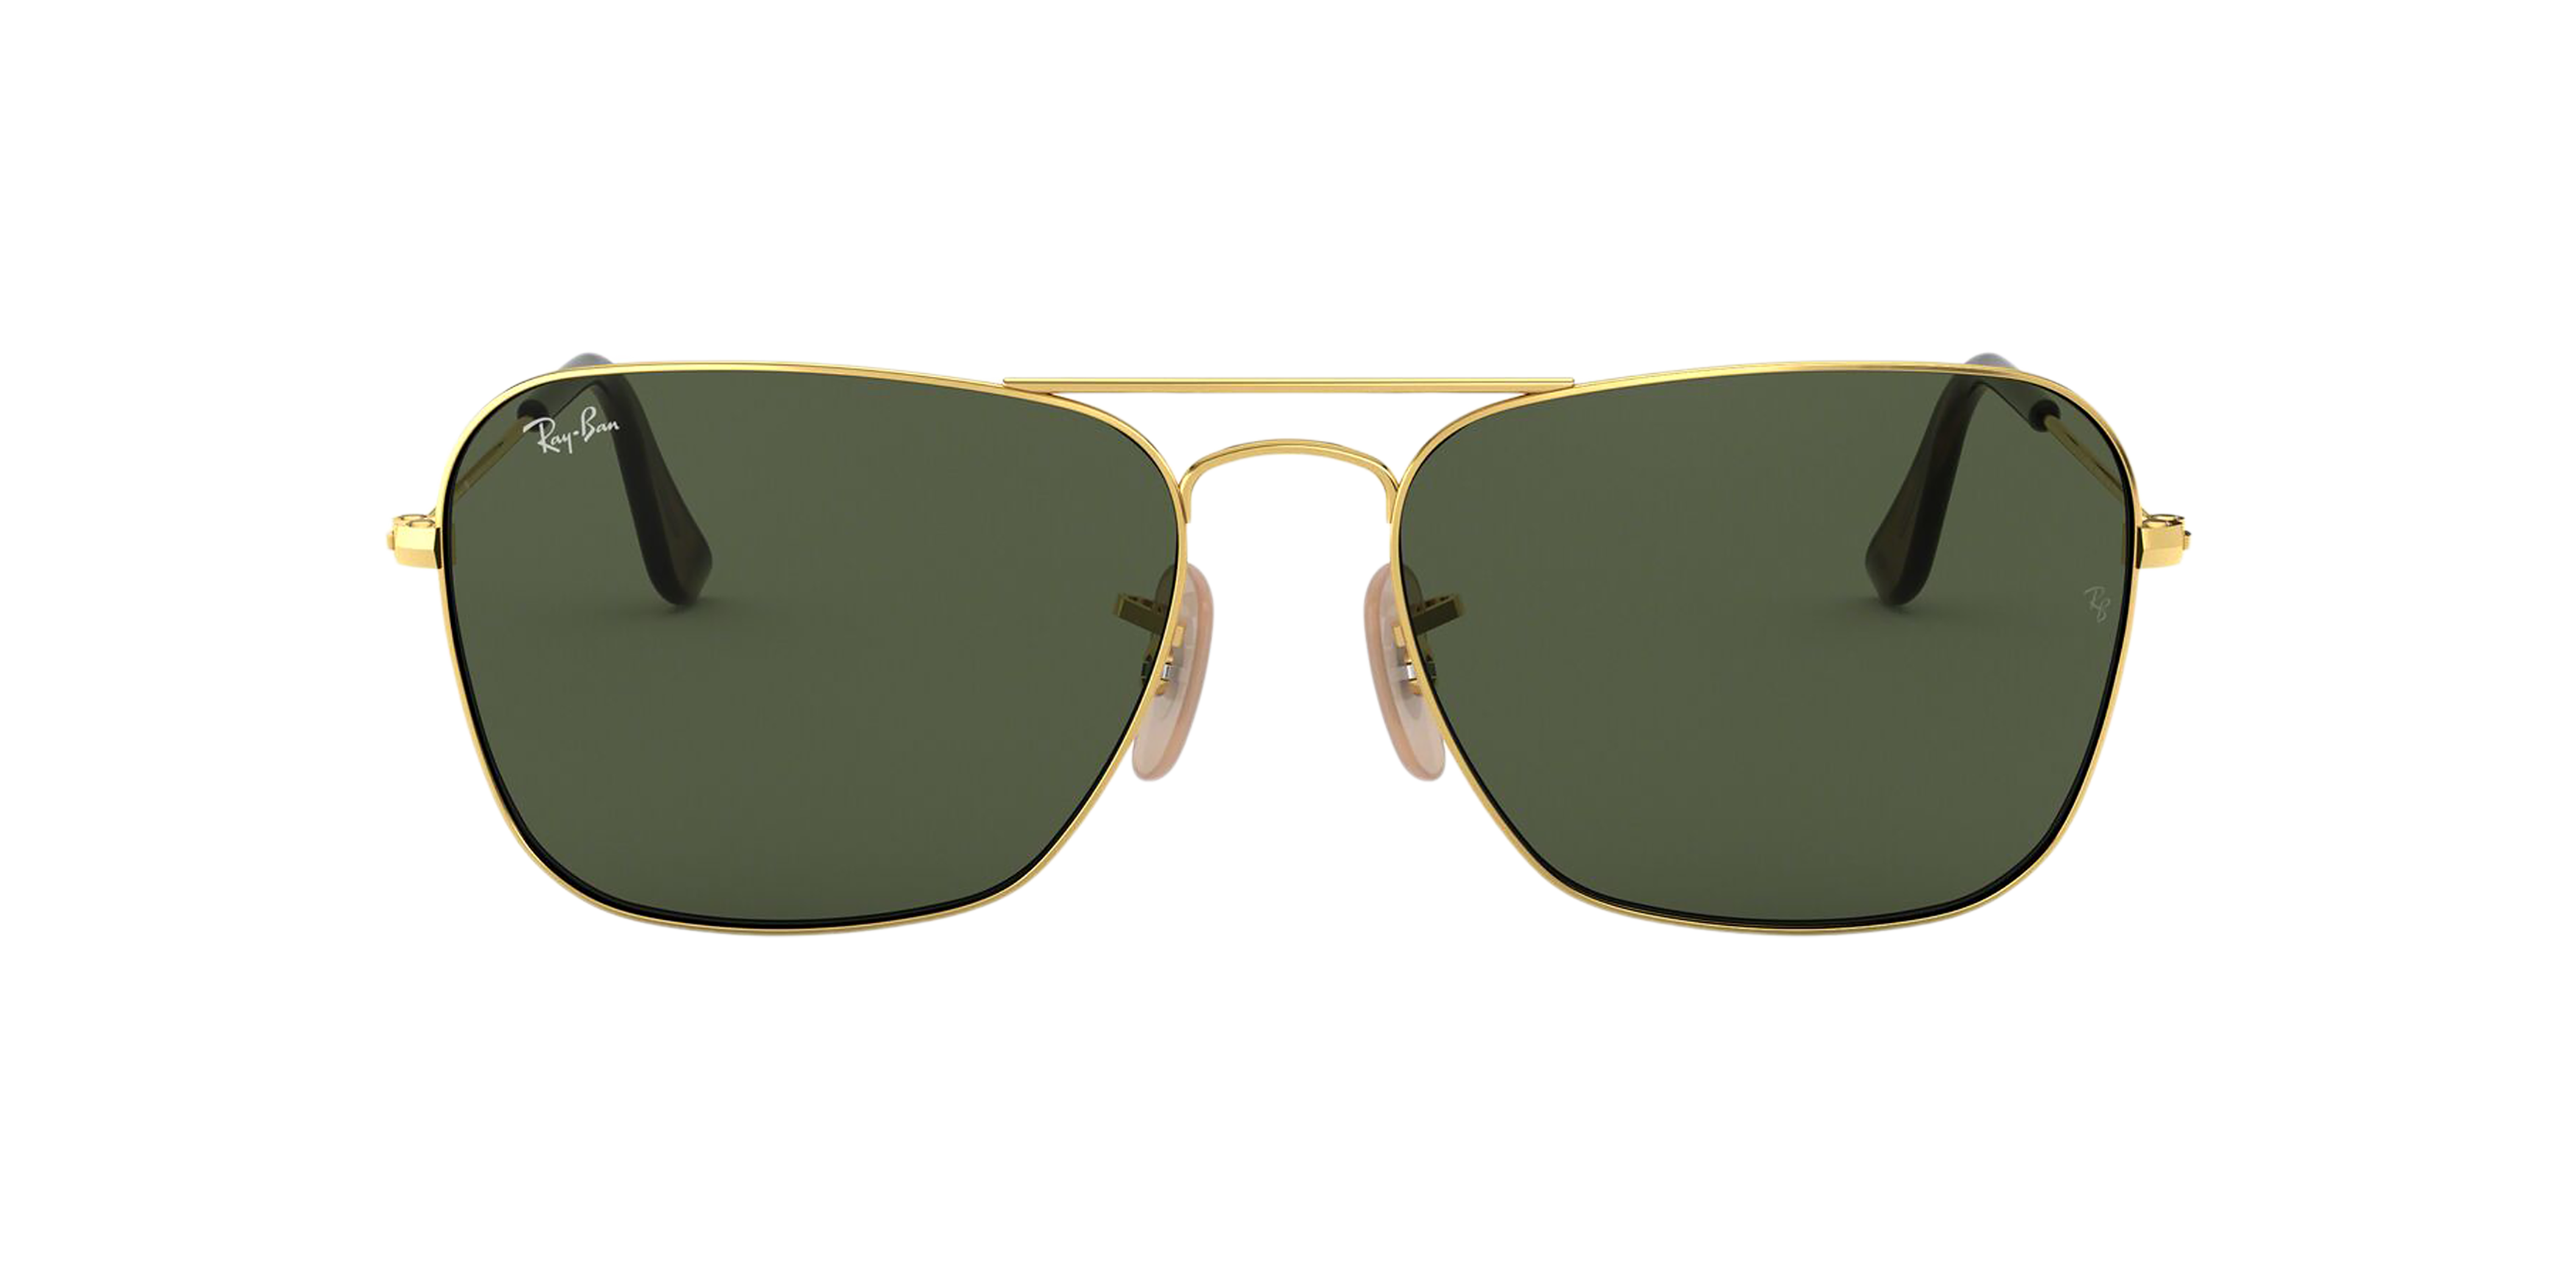 [products.image.front] Ray-Ban Caravan RB3136 181